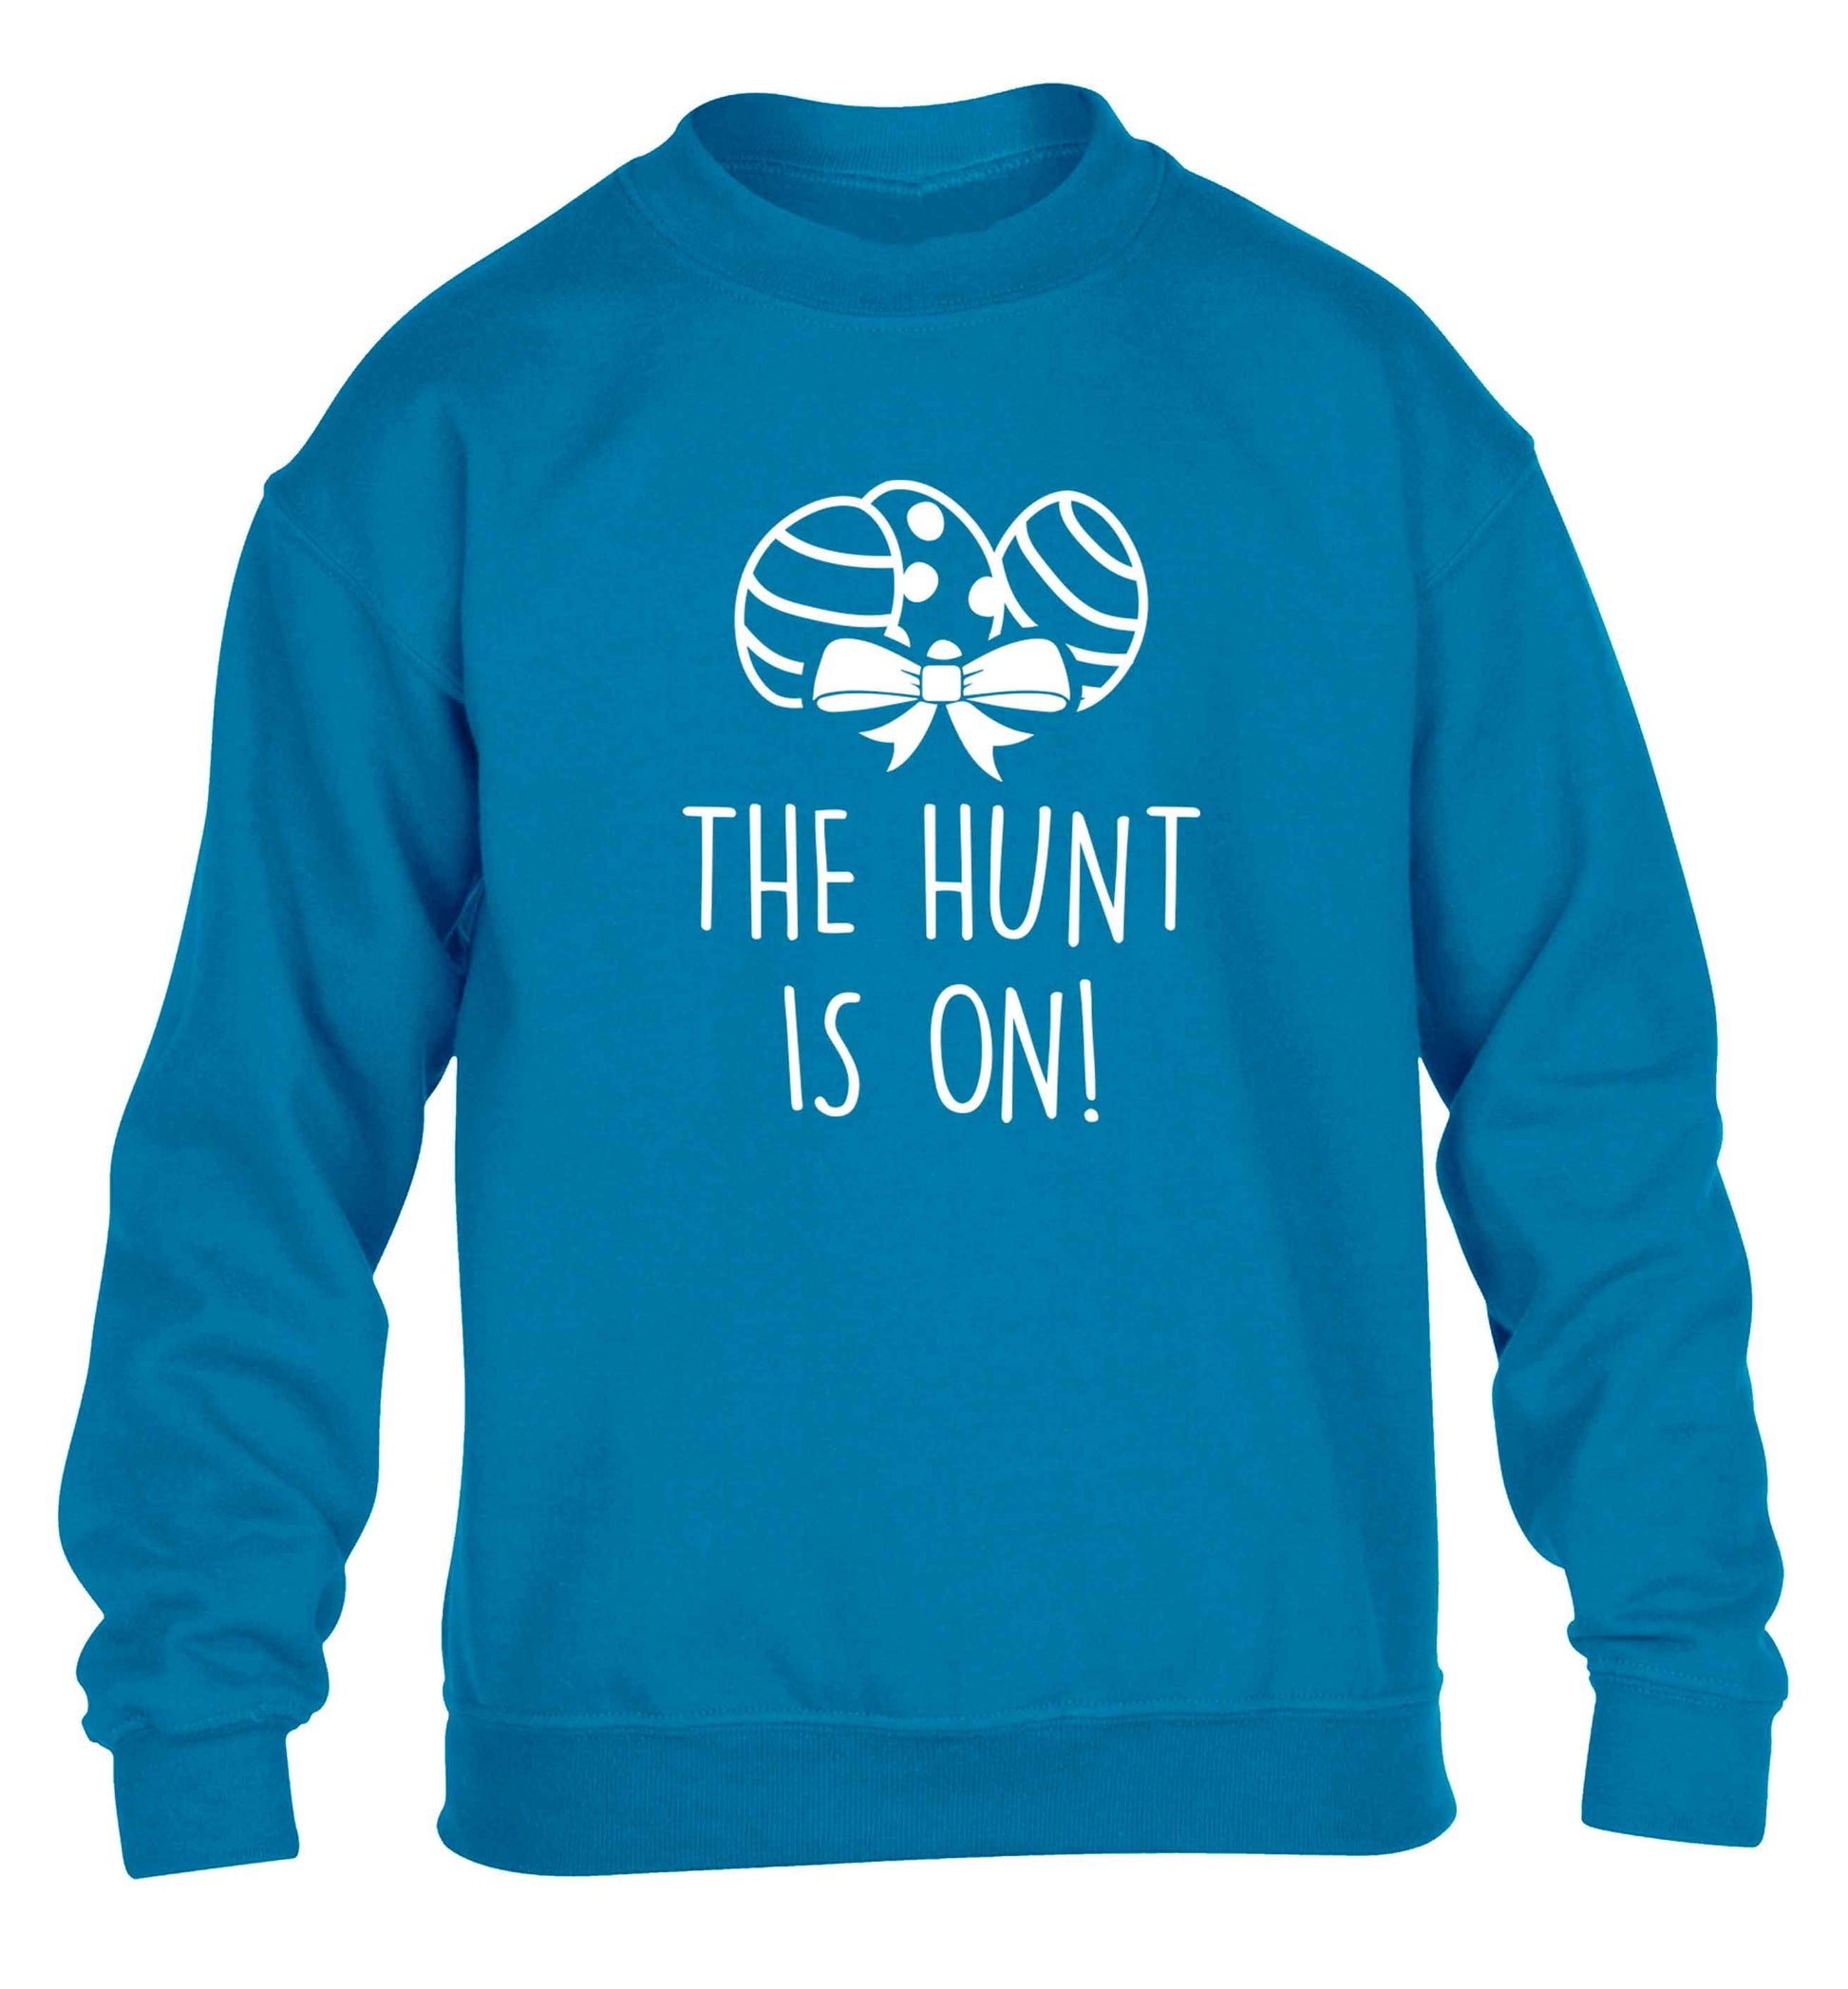 The hunt is on children's blue sweater 12-13 Years